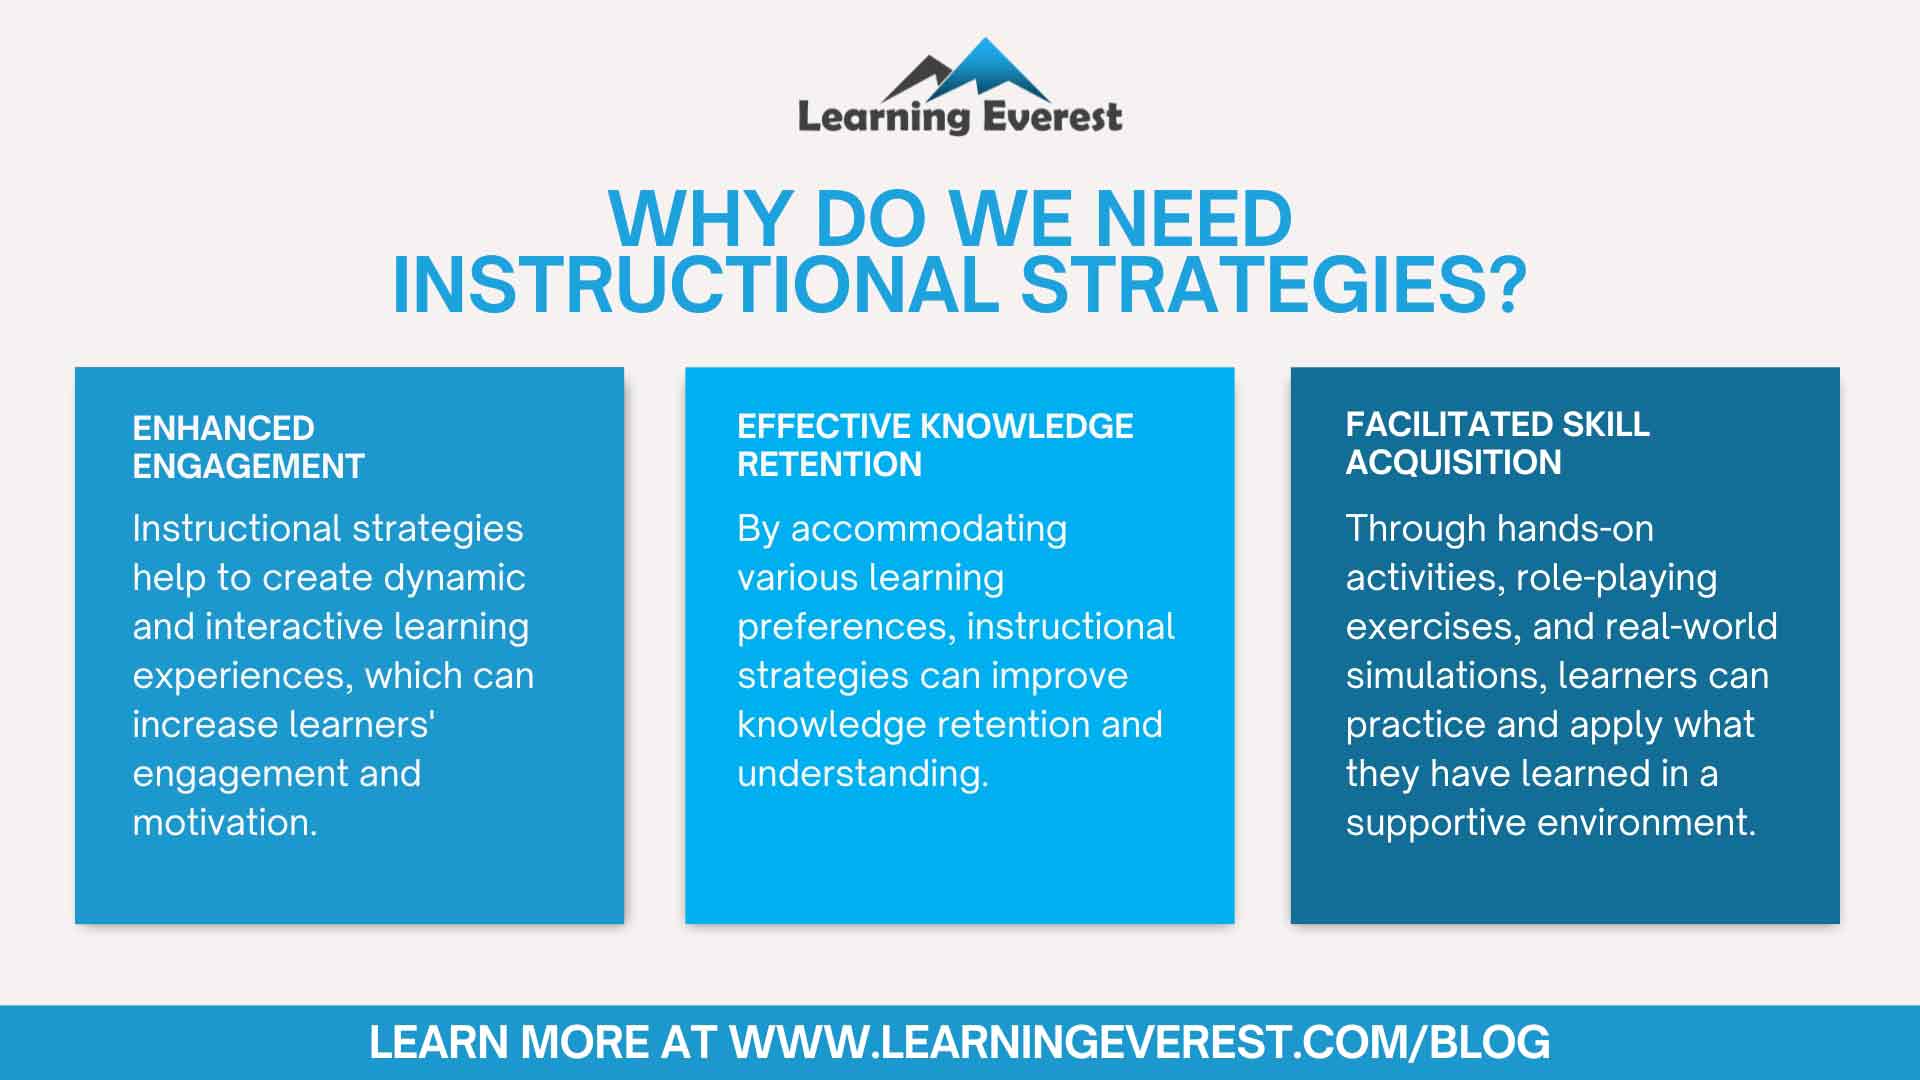 Why do we need Instructional Strategies